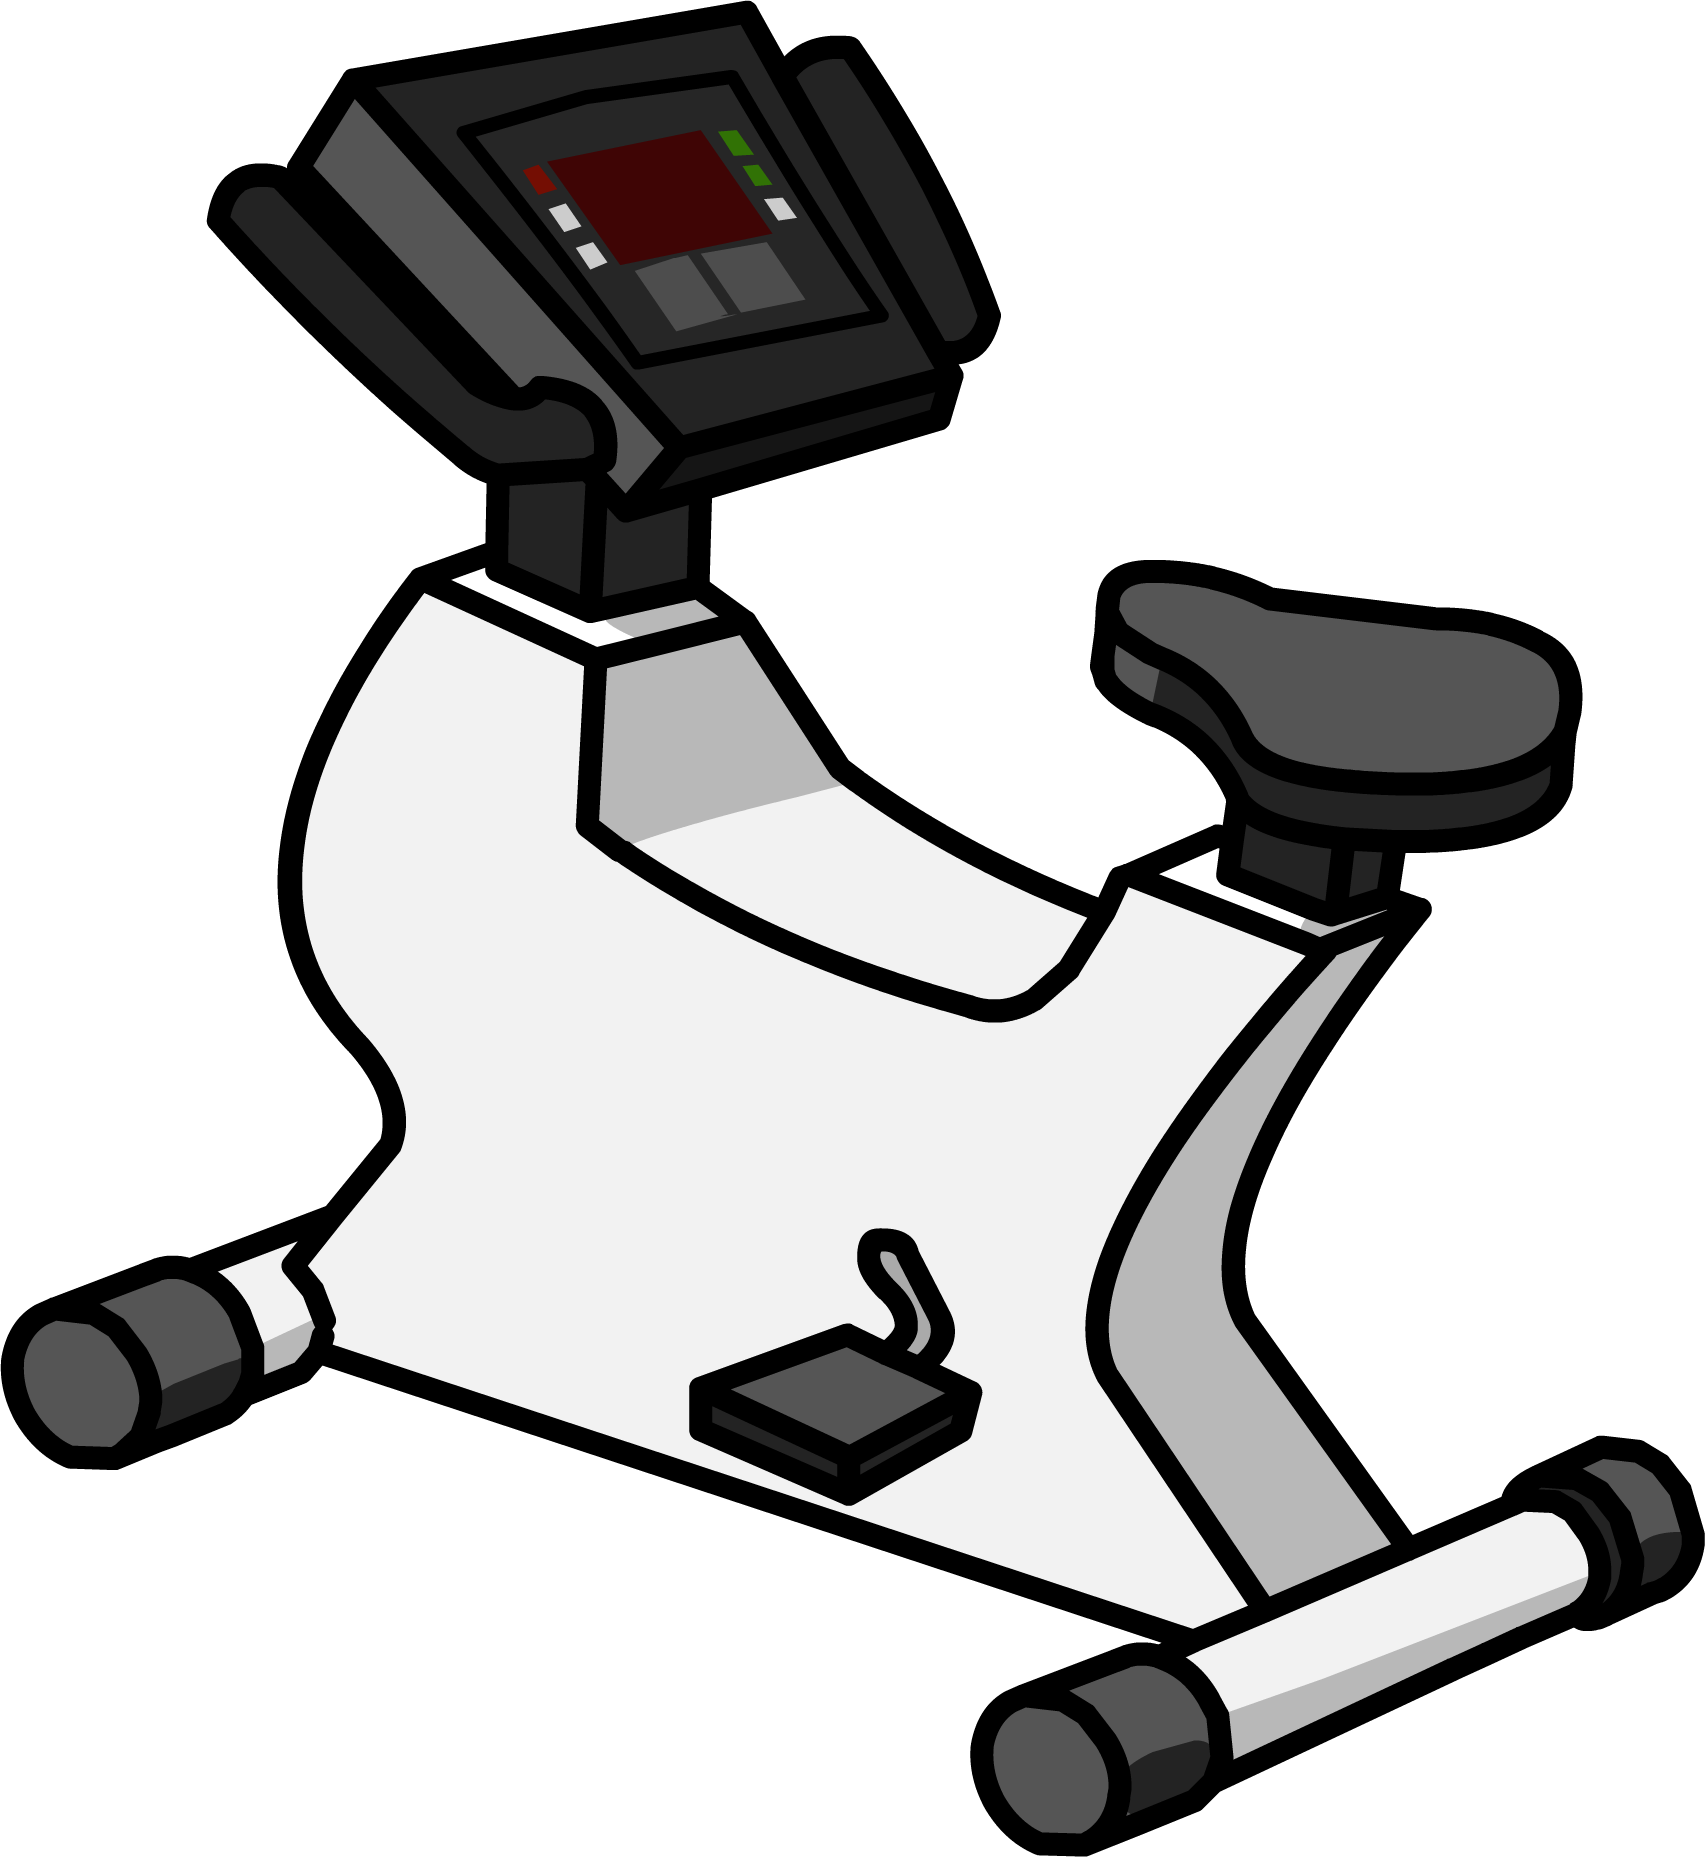 Exercise clipart stationary bike. Image png club penguin